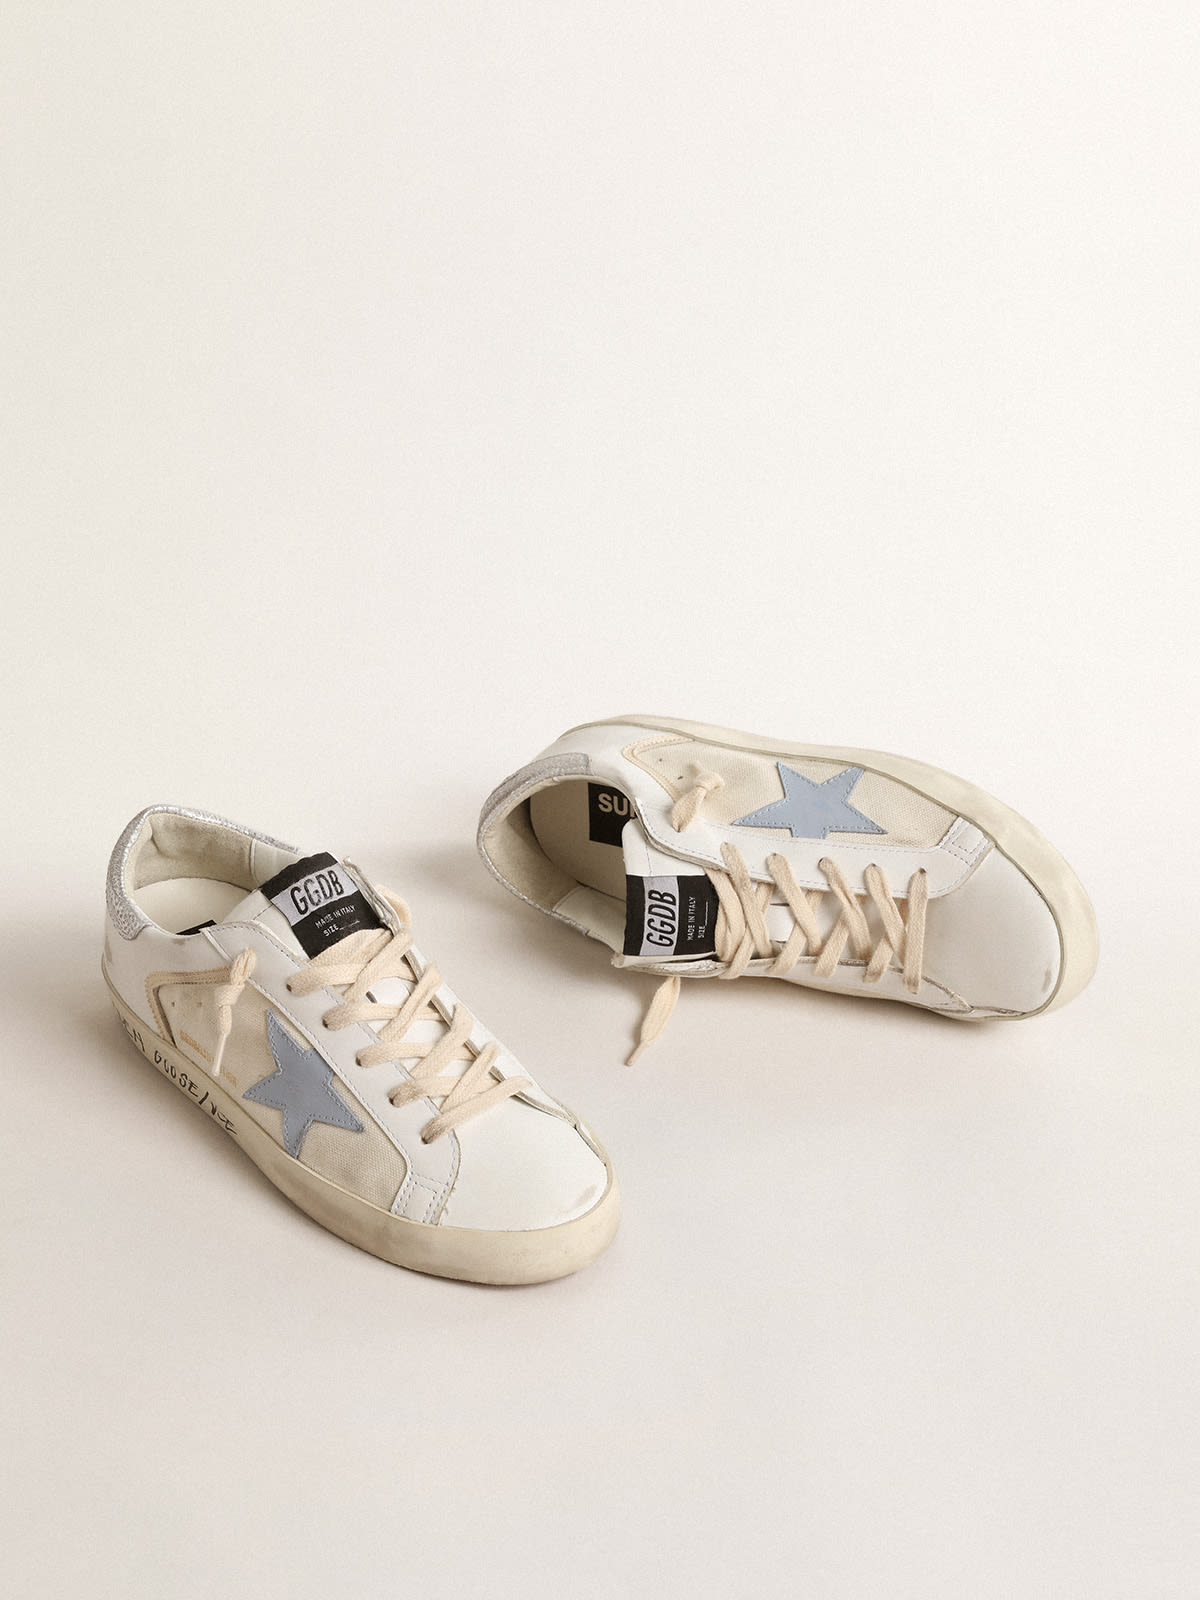 Golden Goose - Super-Star LTD with light blue star and silver leather heel tab in 